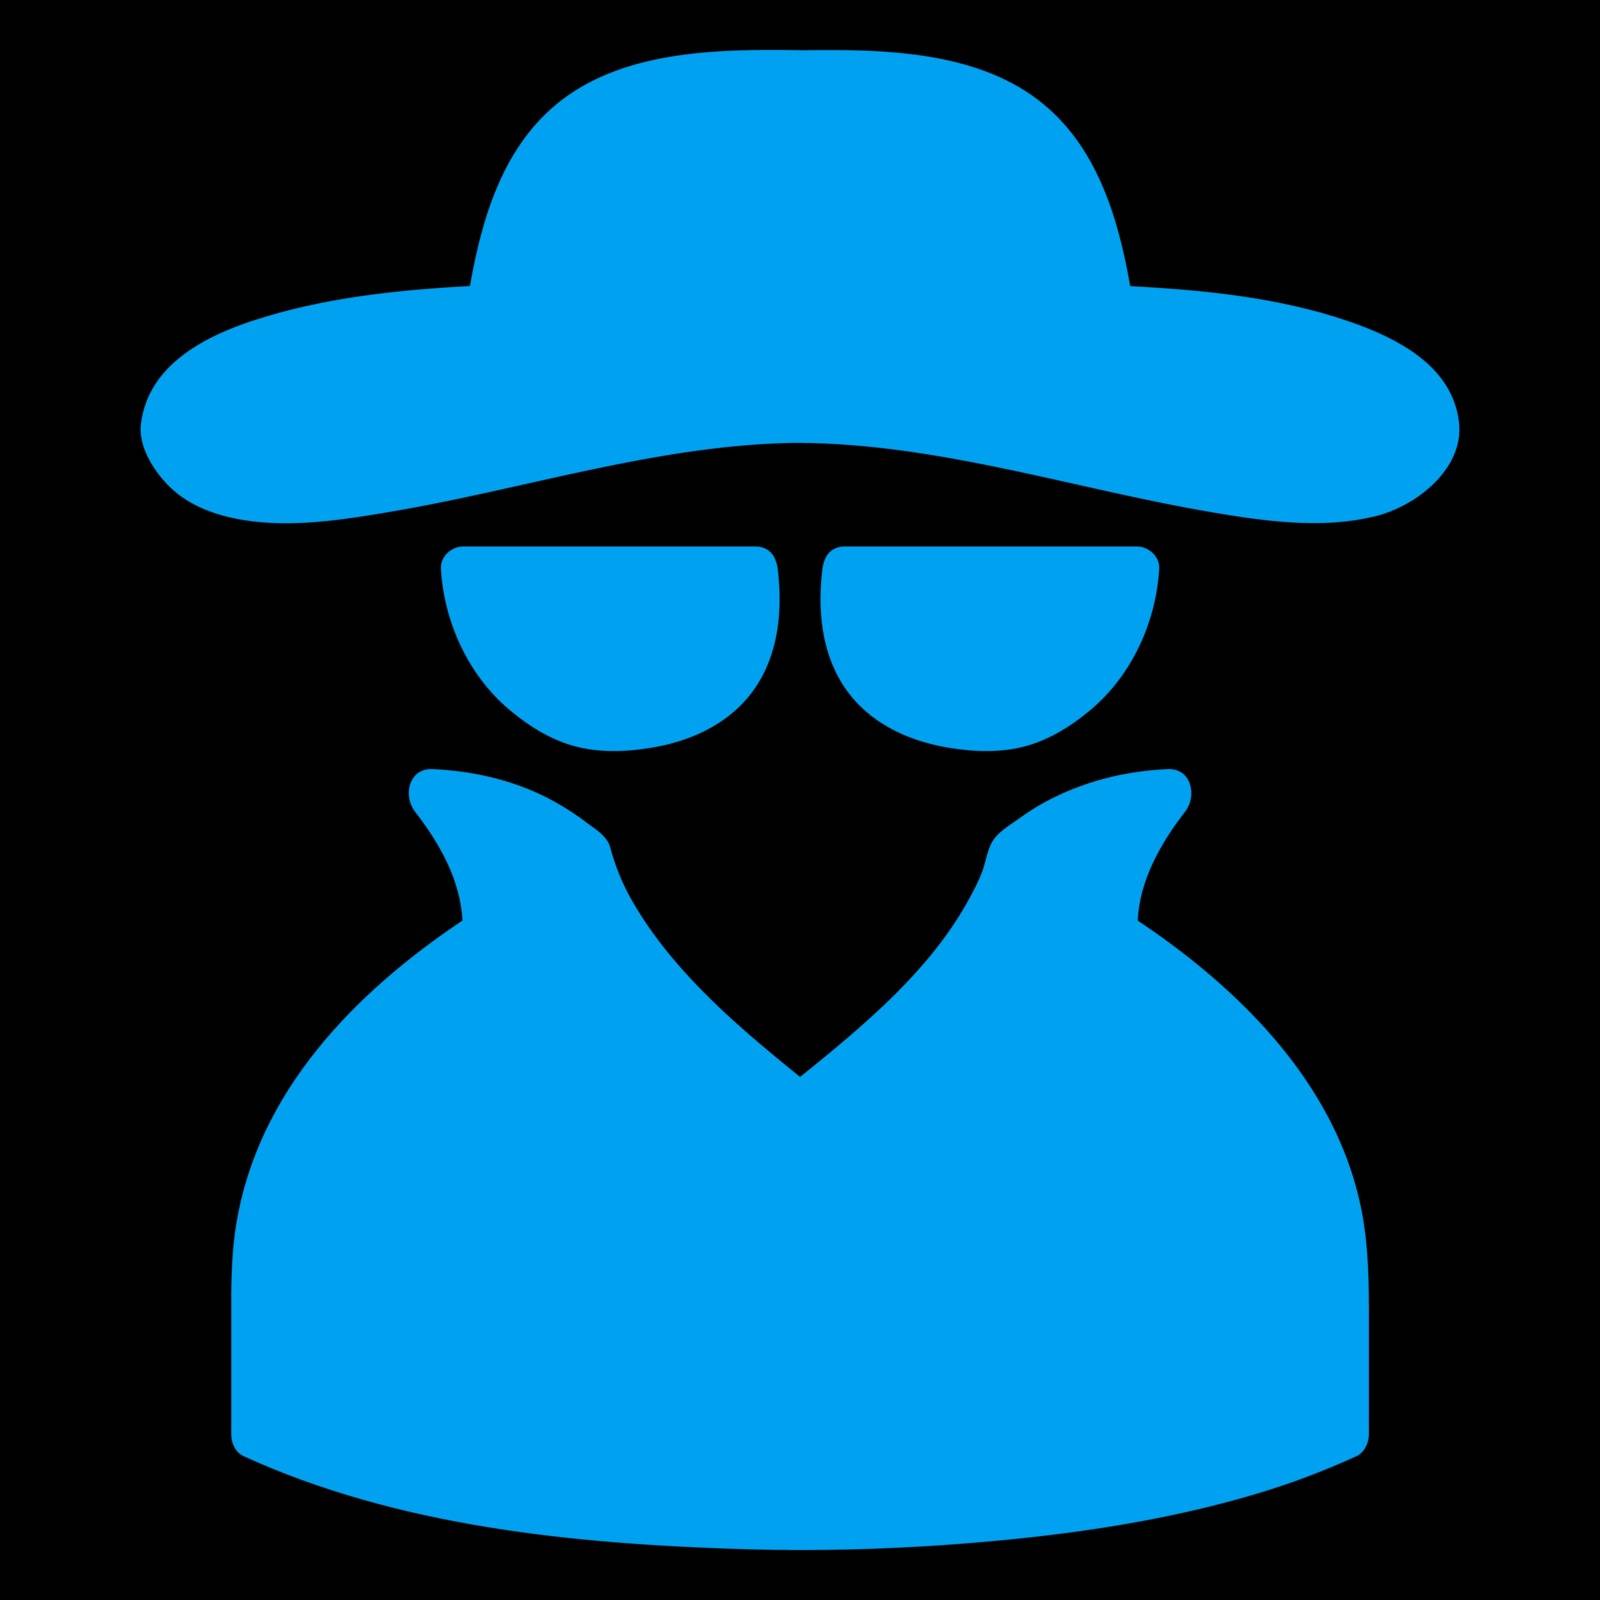 Spy icon from Business Bicolor Set by ahasoft